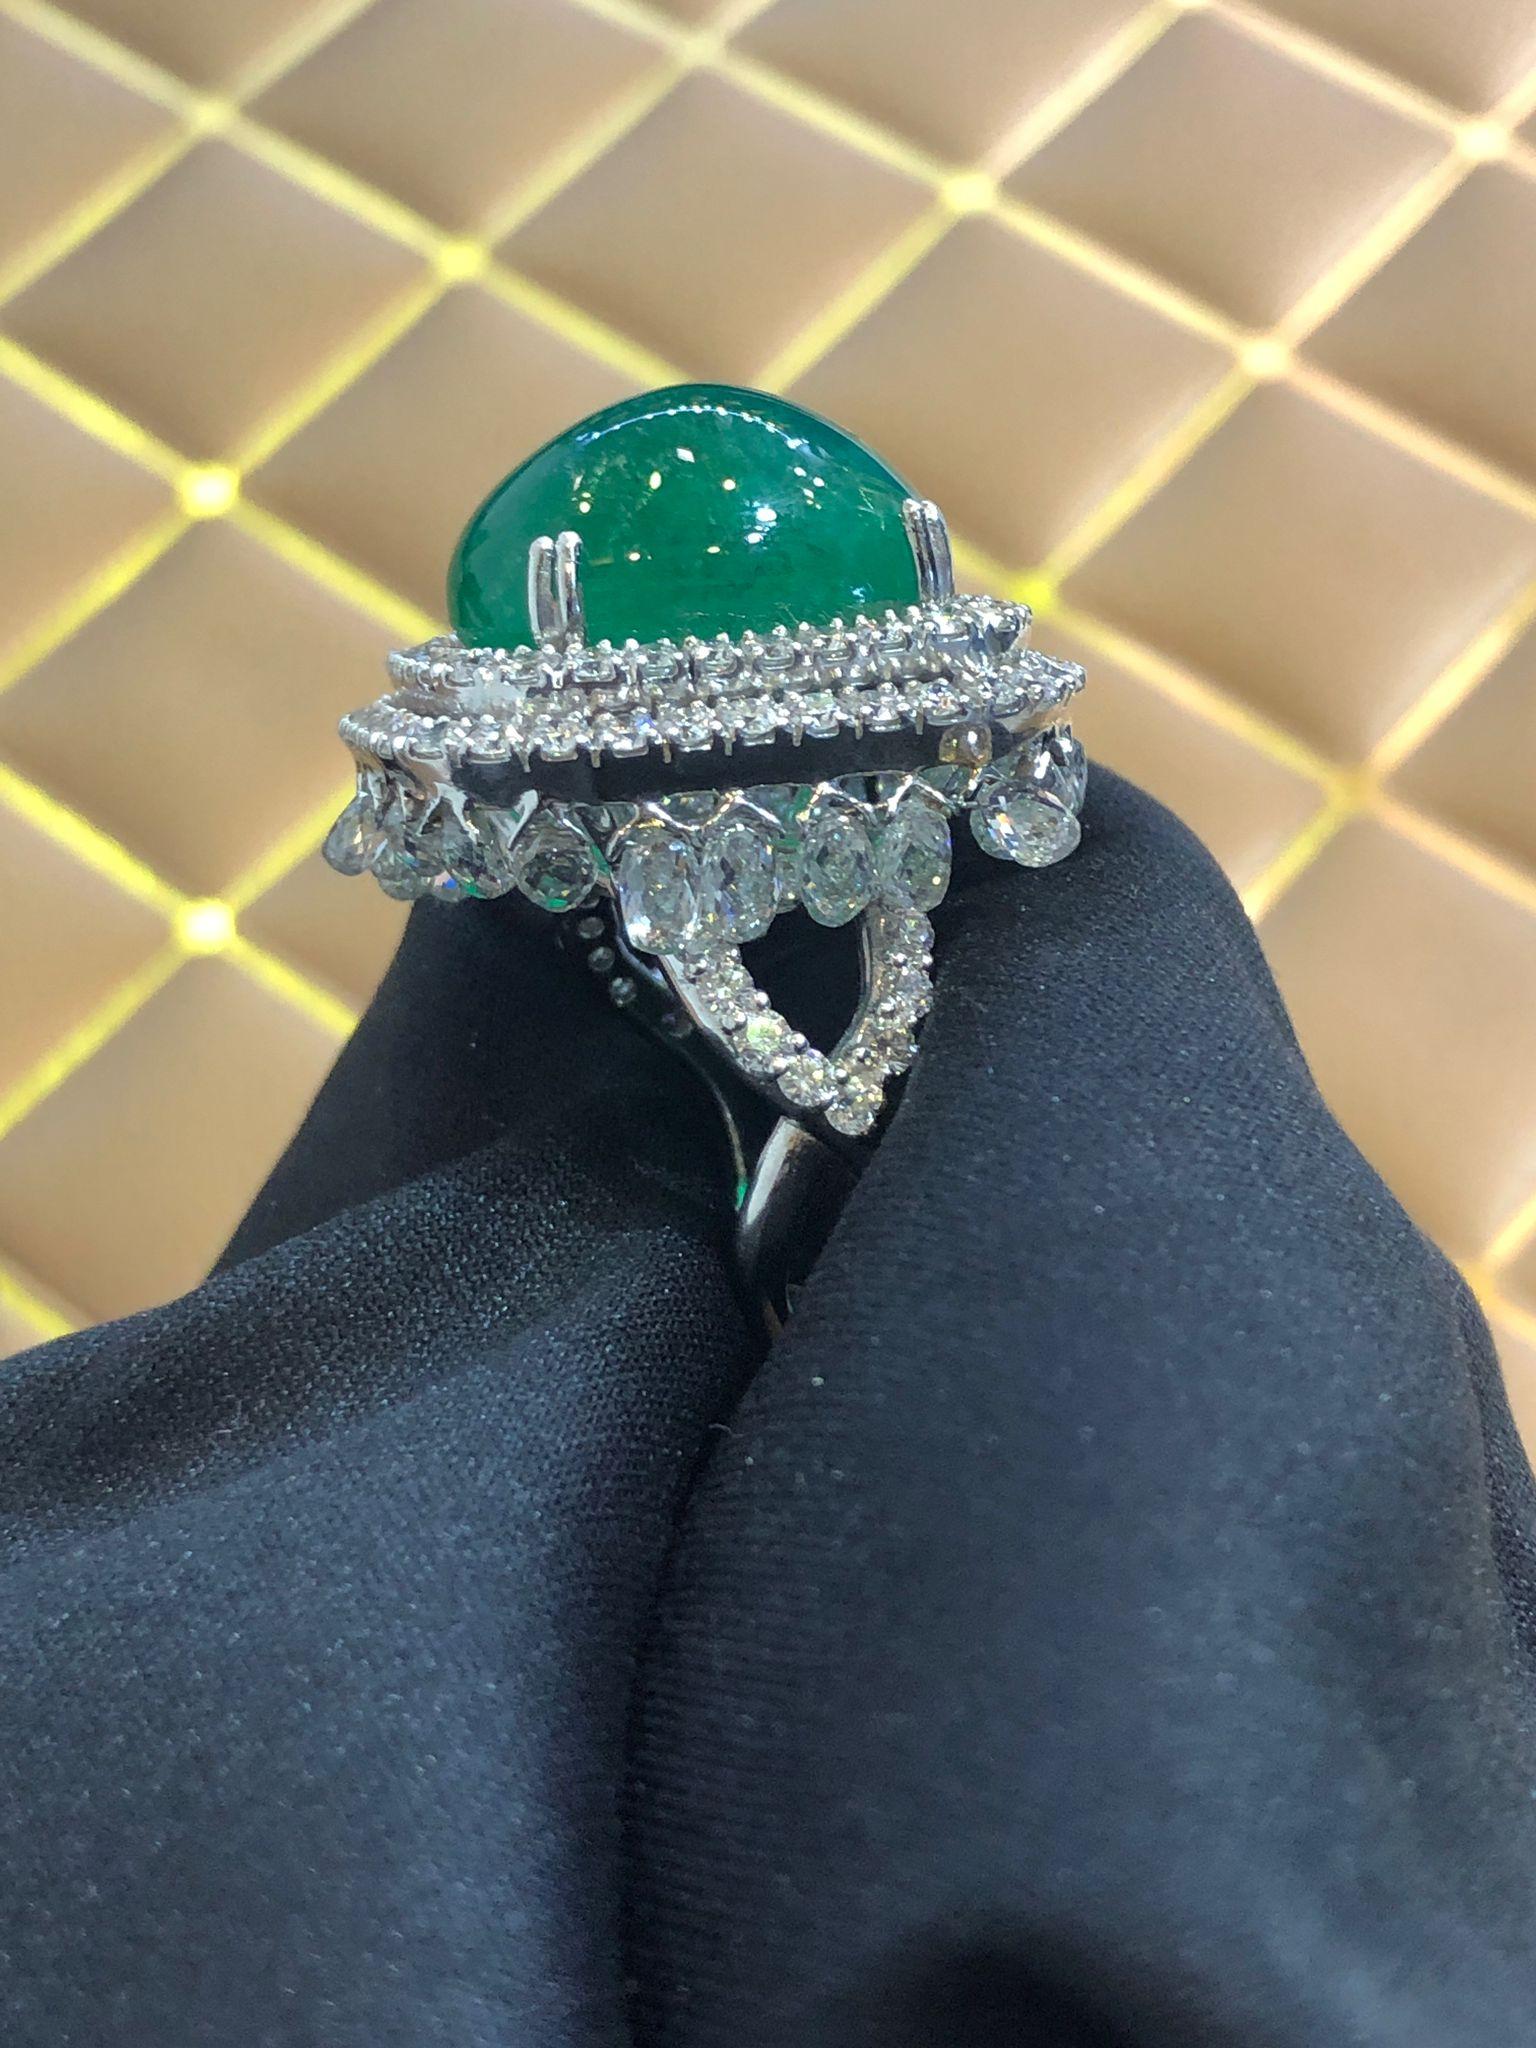 PANIM 18k White Gold Dangling Briolette Diamond & Emerald Ring 

Inspired by the beauty of a rain drop, Our Briolette Dangling diamond ring is an absolute show-stopper. It has dangling White Diamond Briolettes with big cabochon Emerald as a center